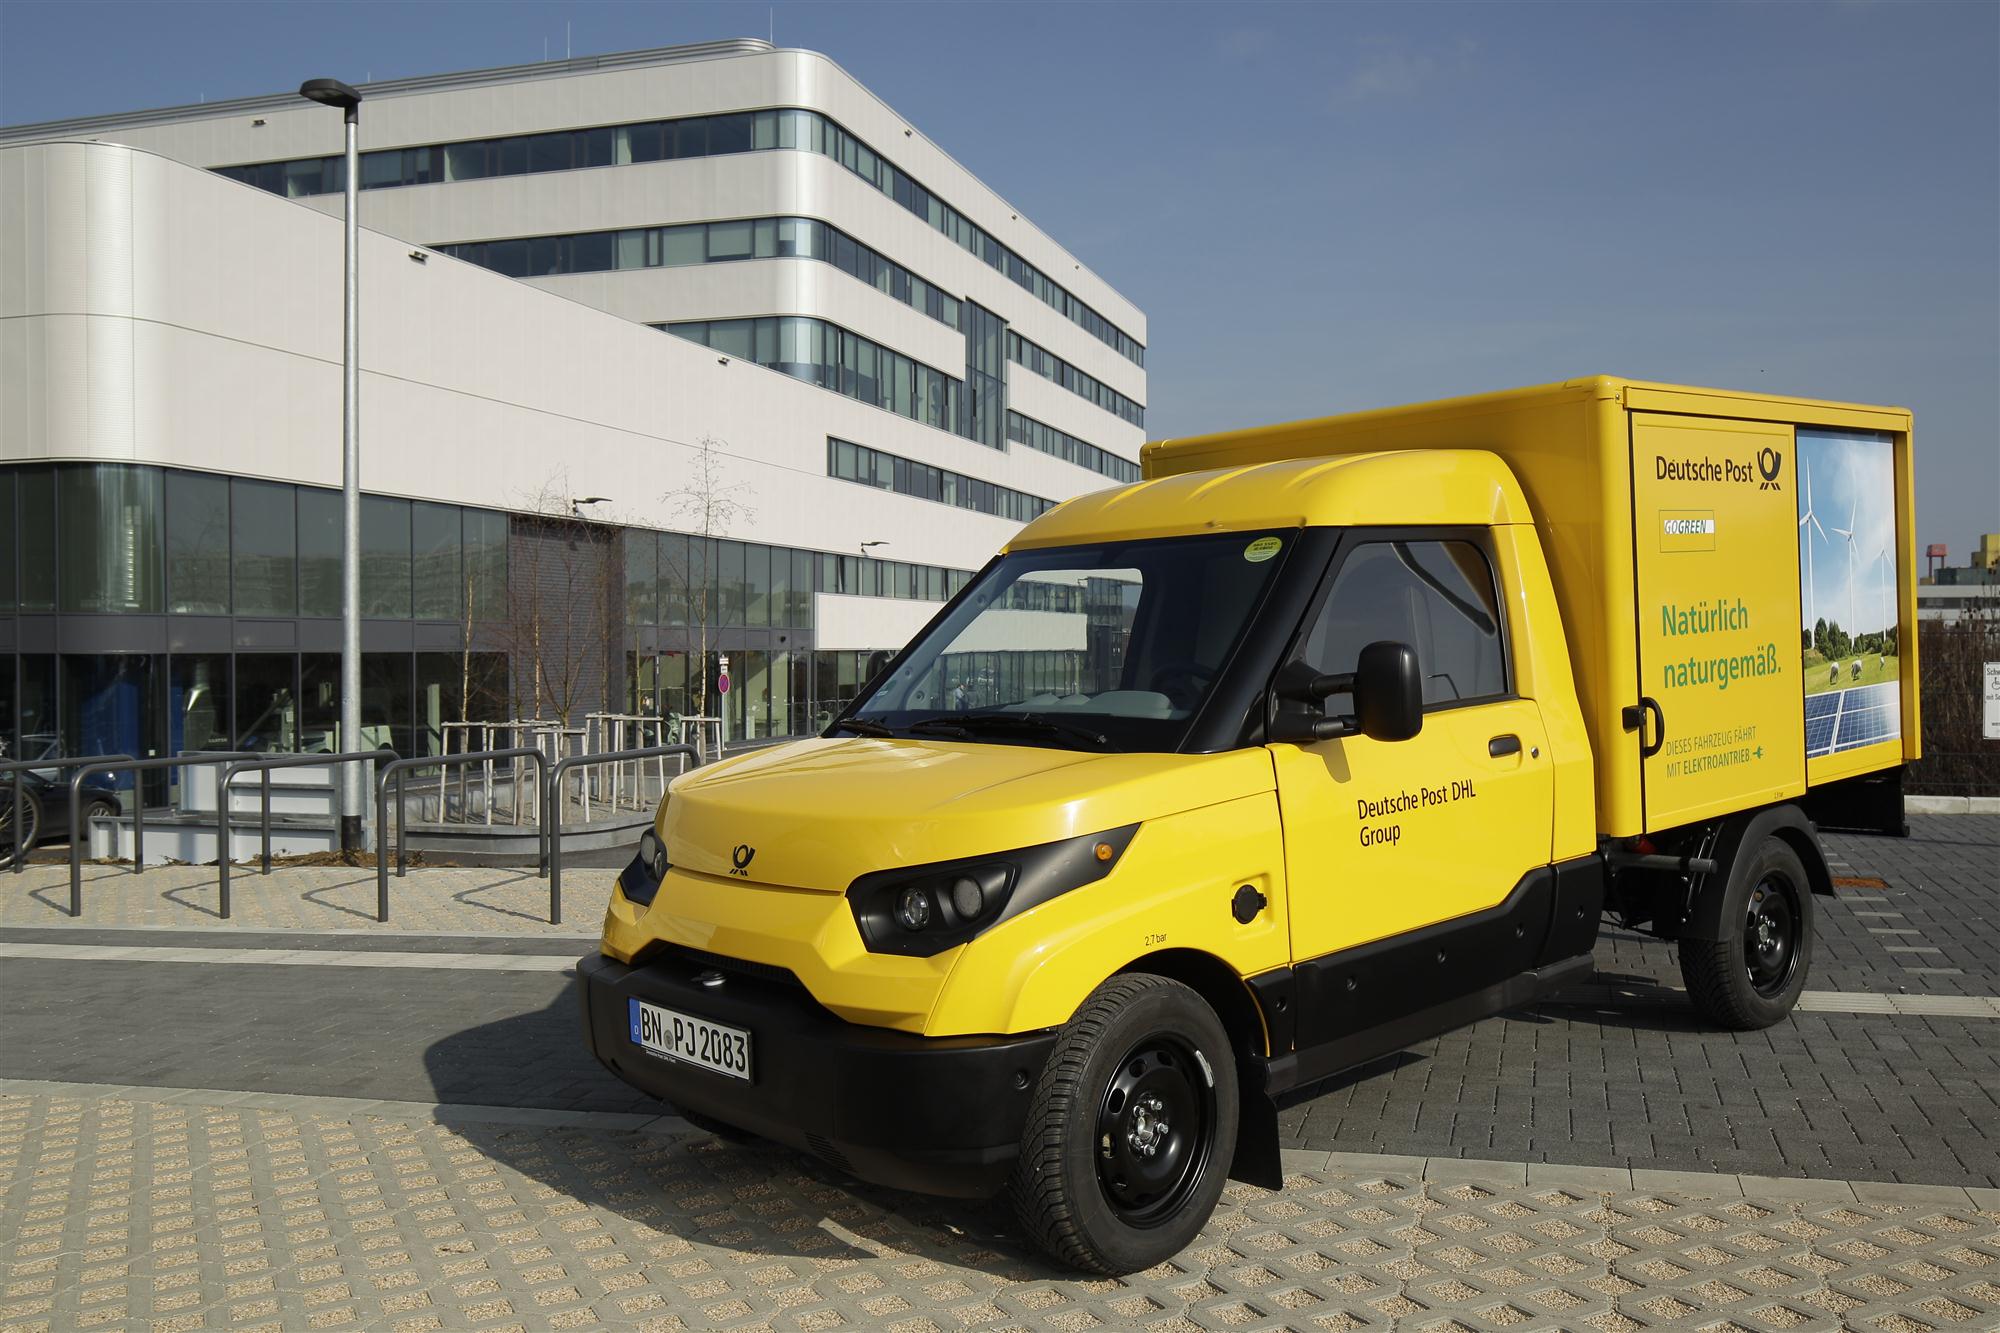 Self Photos / Files - DHL StreetScooter electric vehicle used for the delivery of mail and parcels